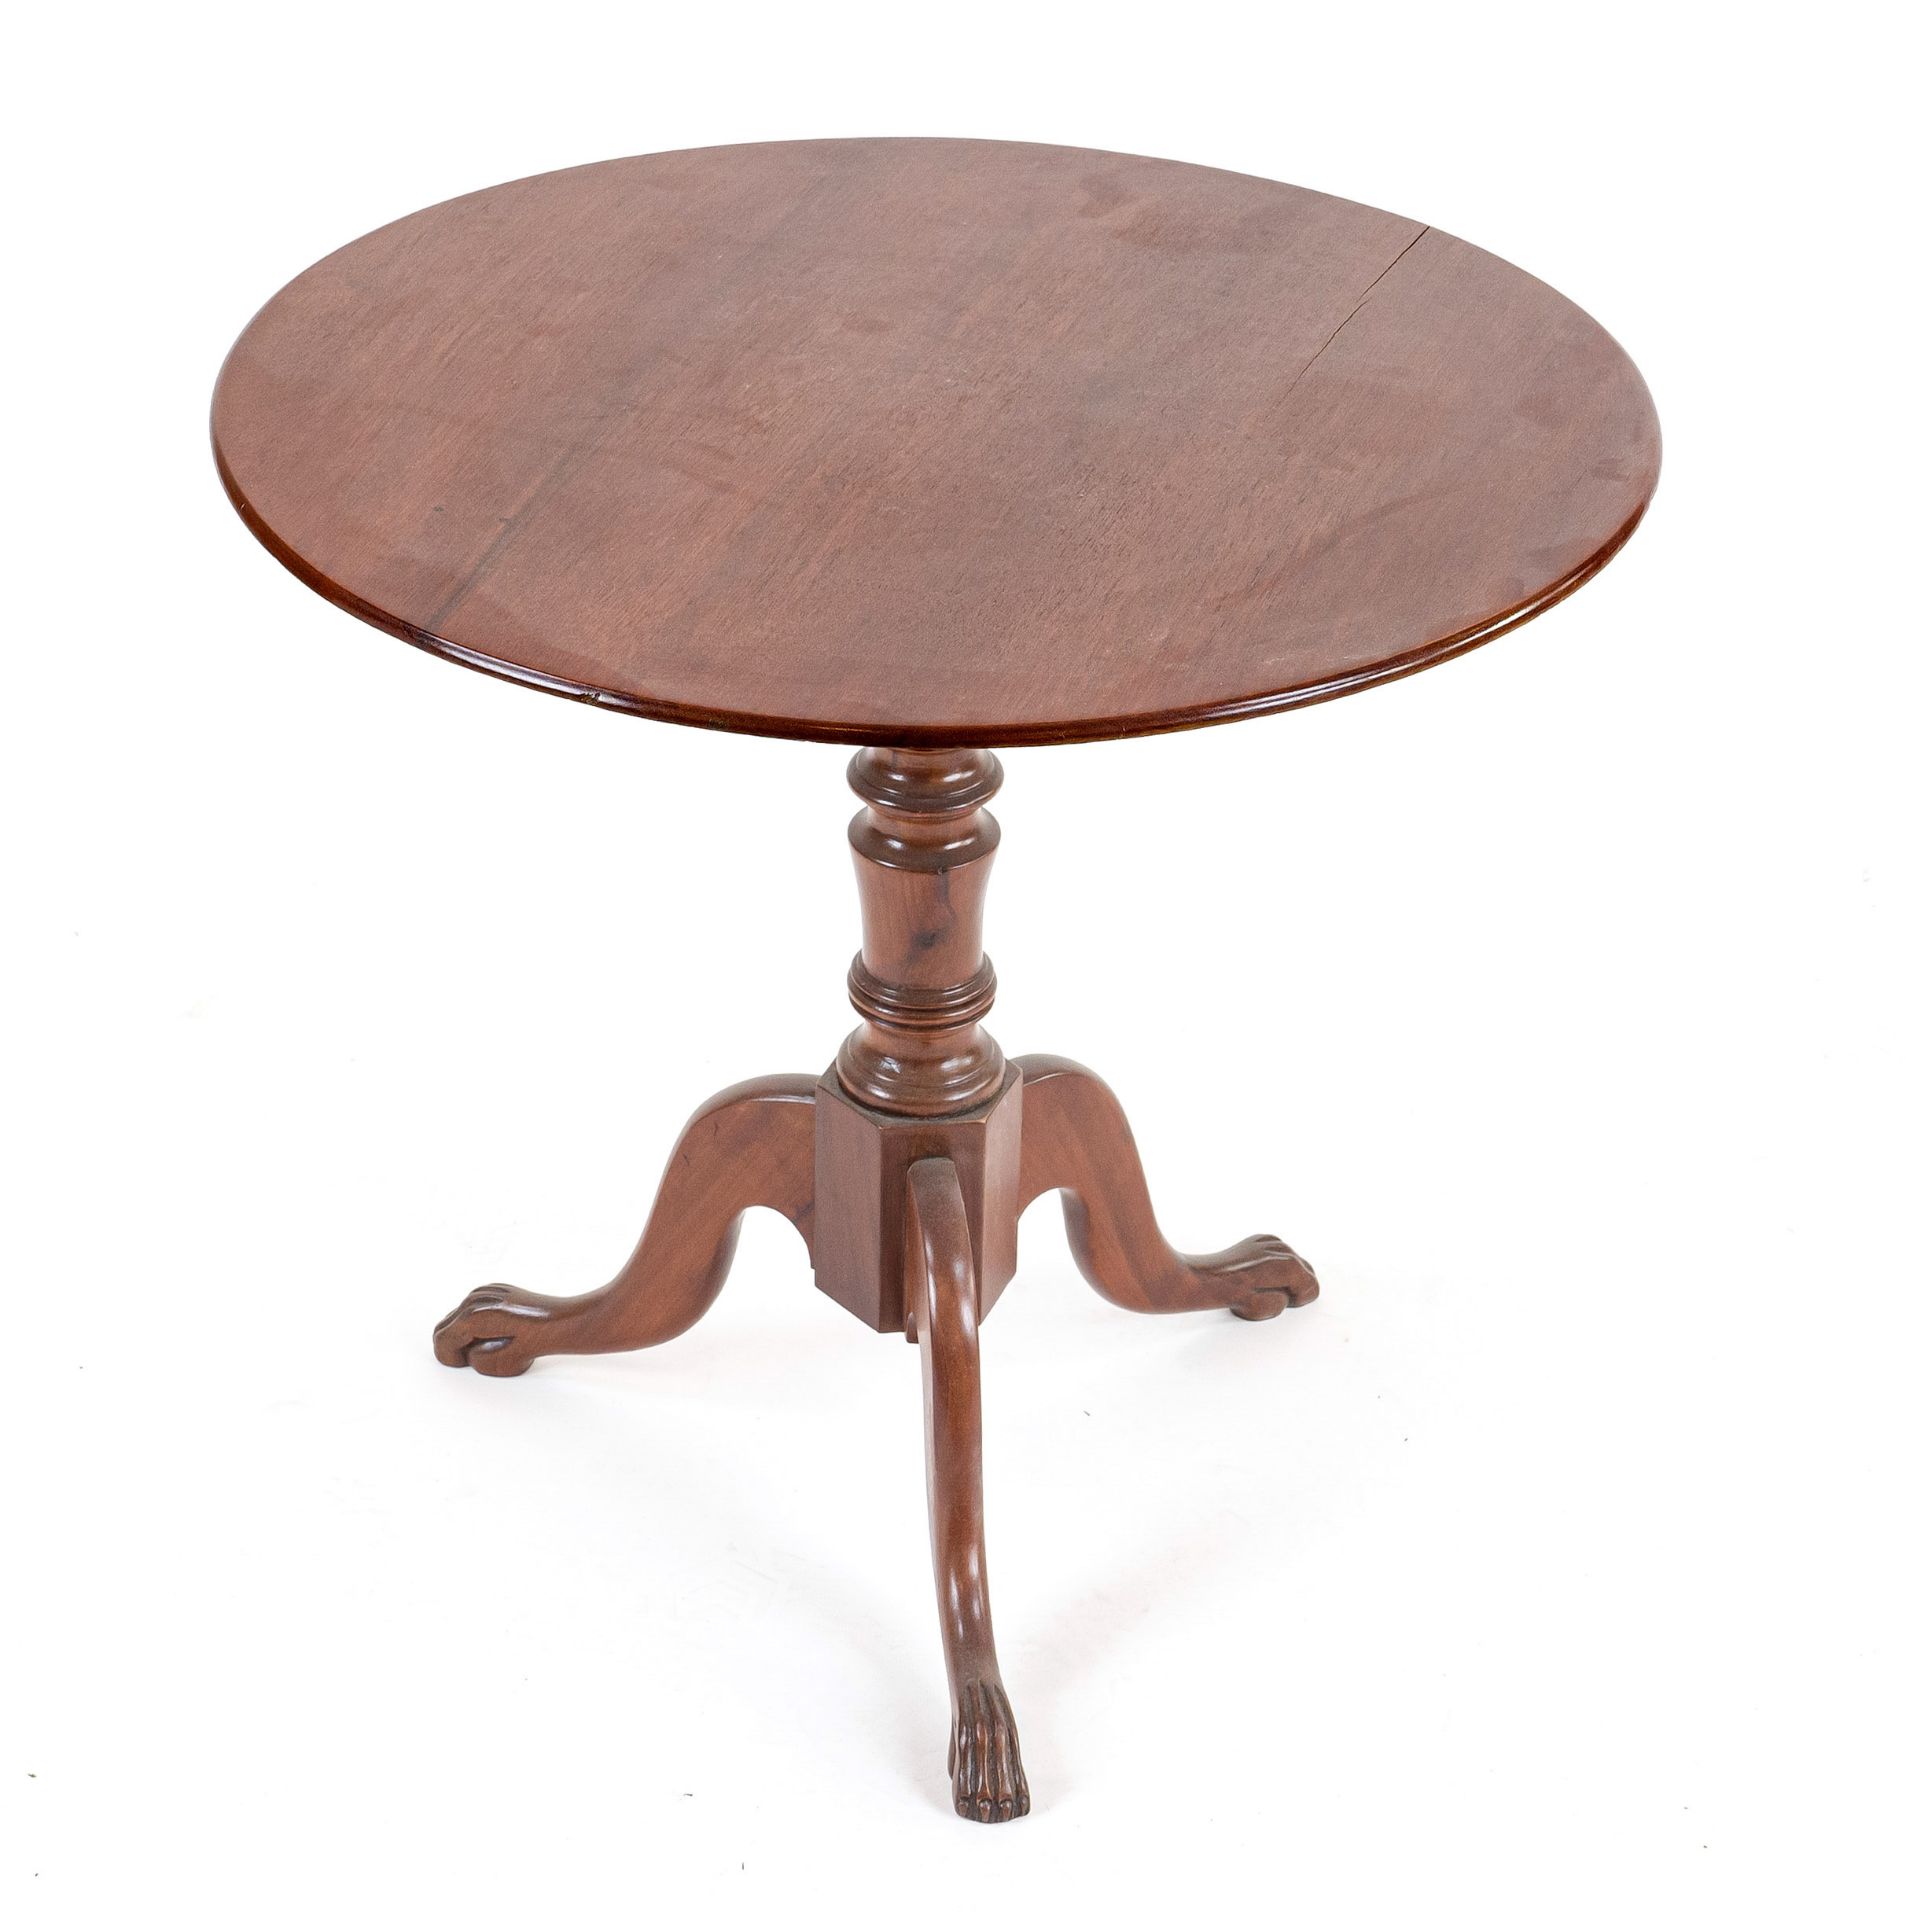 Round side table, 19th century, mahogany, h. 58 cm, d. 62 cm - The furniture can only be viewed